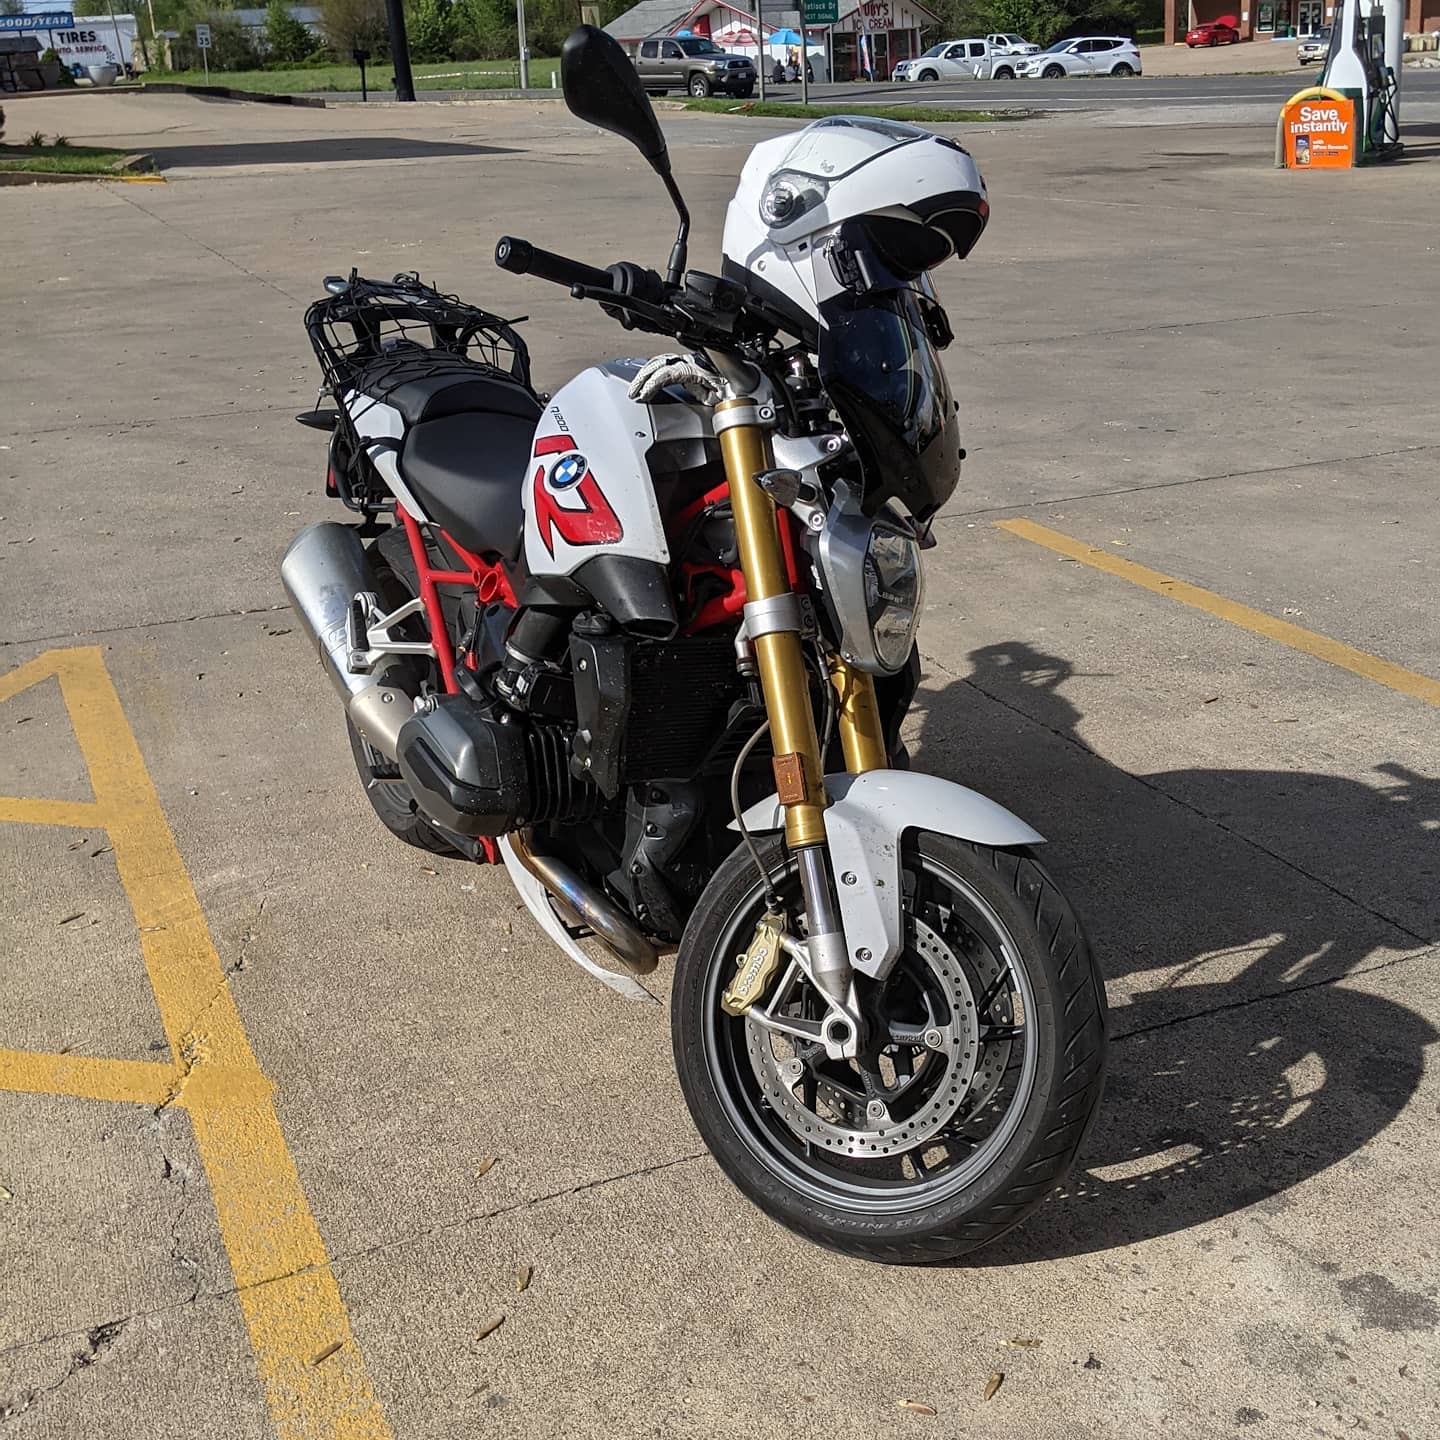 By the time I get home I will be just shy of 400 miles today with the bugs on myself to prove it. Totally worth it #bmwmotorrad #motorrad #r1200r #ridingmo